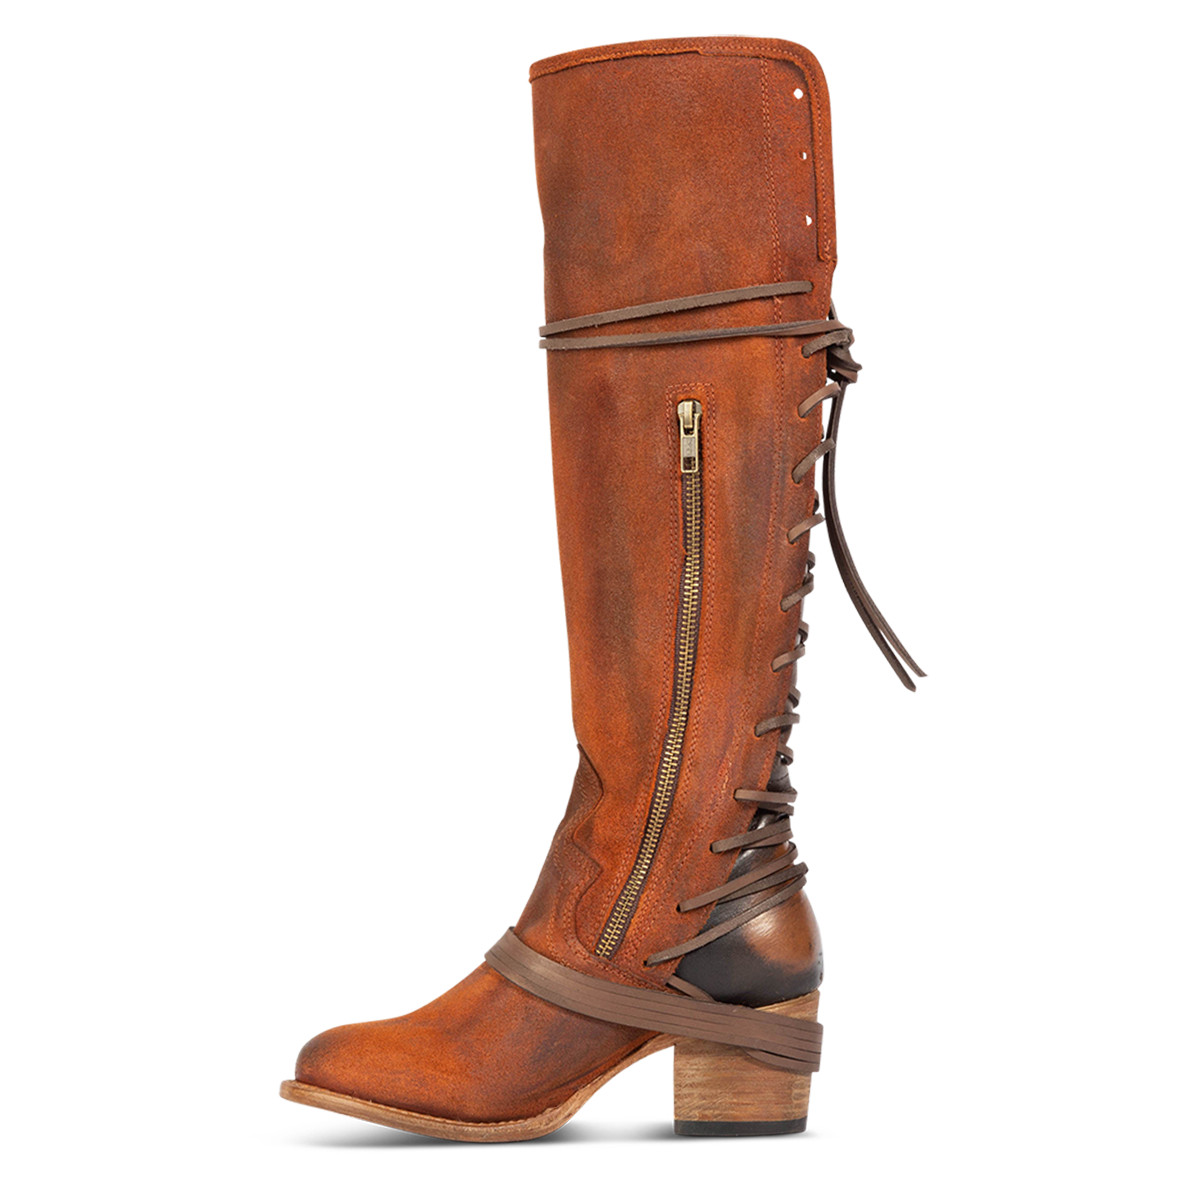 Inside view showing working brass zip closure and adjustable wrap around laces on FREEBIRD women's Coal rust suede tall boot